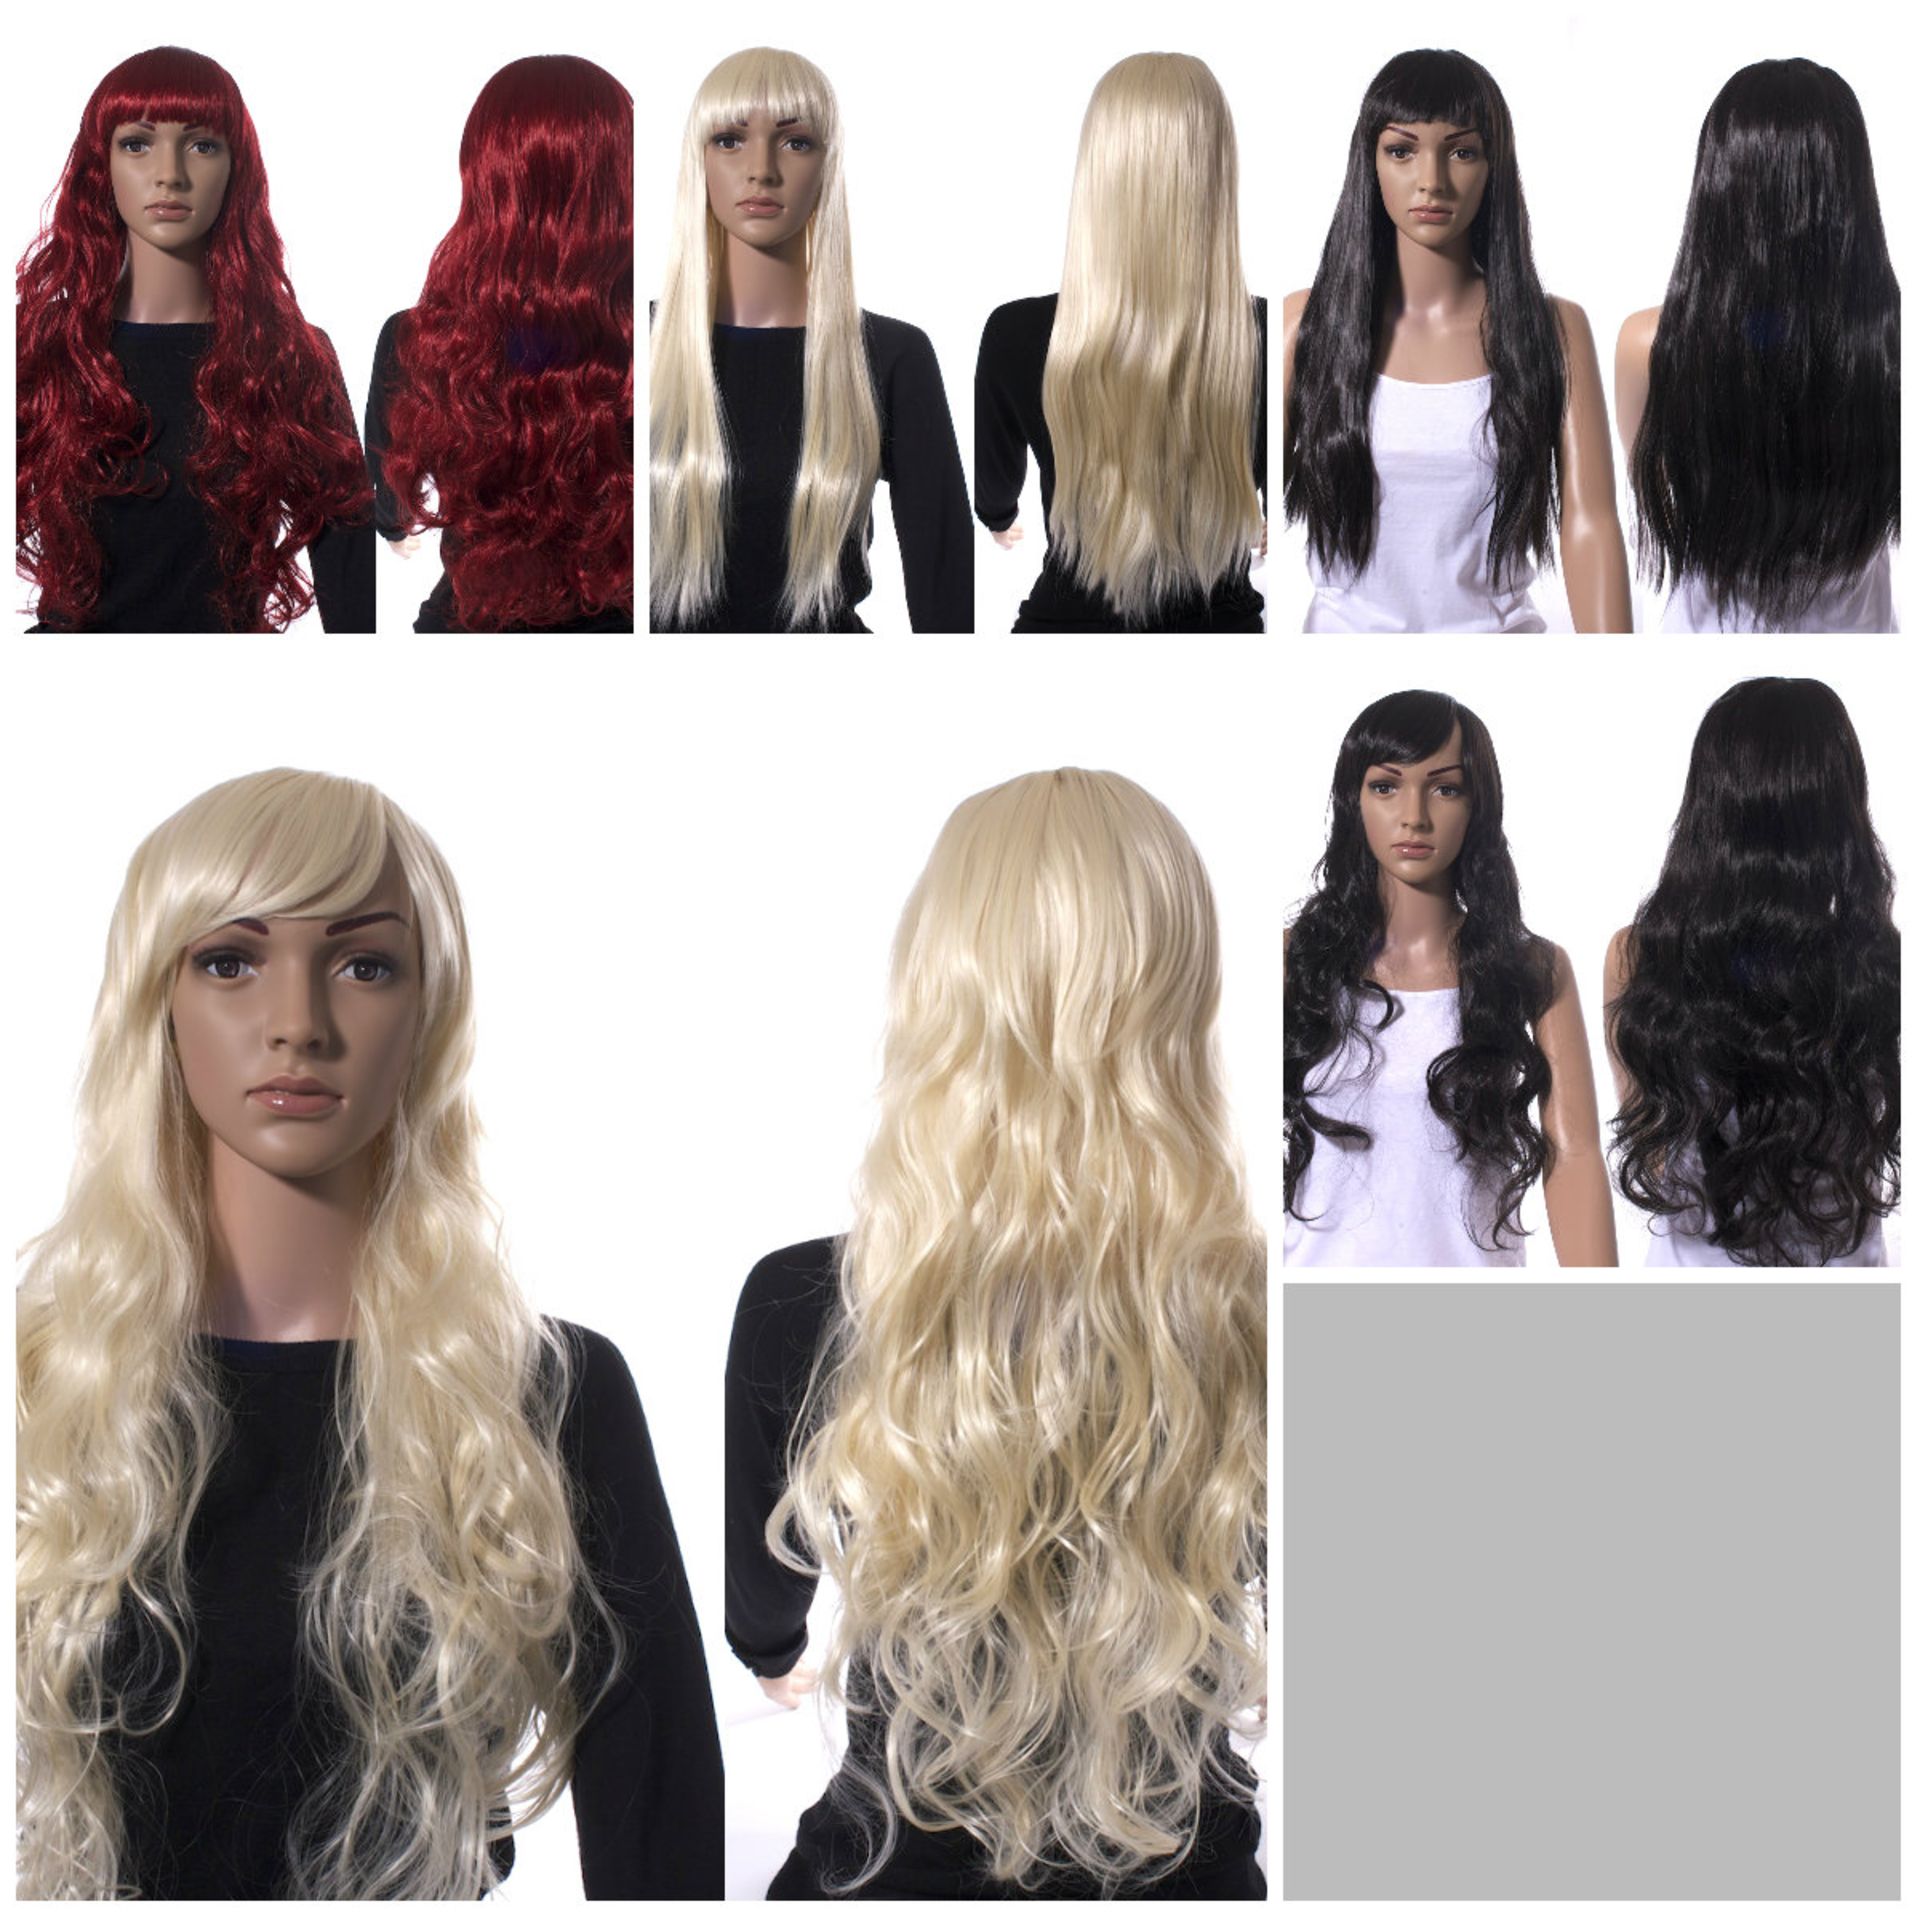 High Resale Value. 134 x High Quality Wigs. Blonde, Red and black. Straight Wavy and Curly. All in